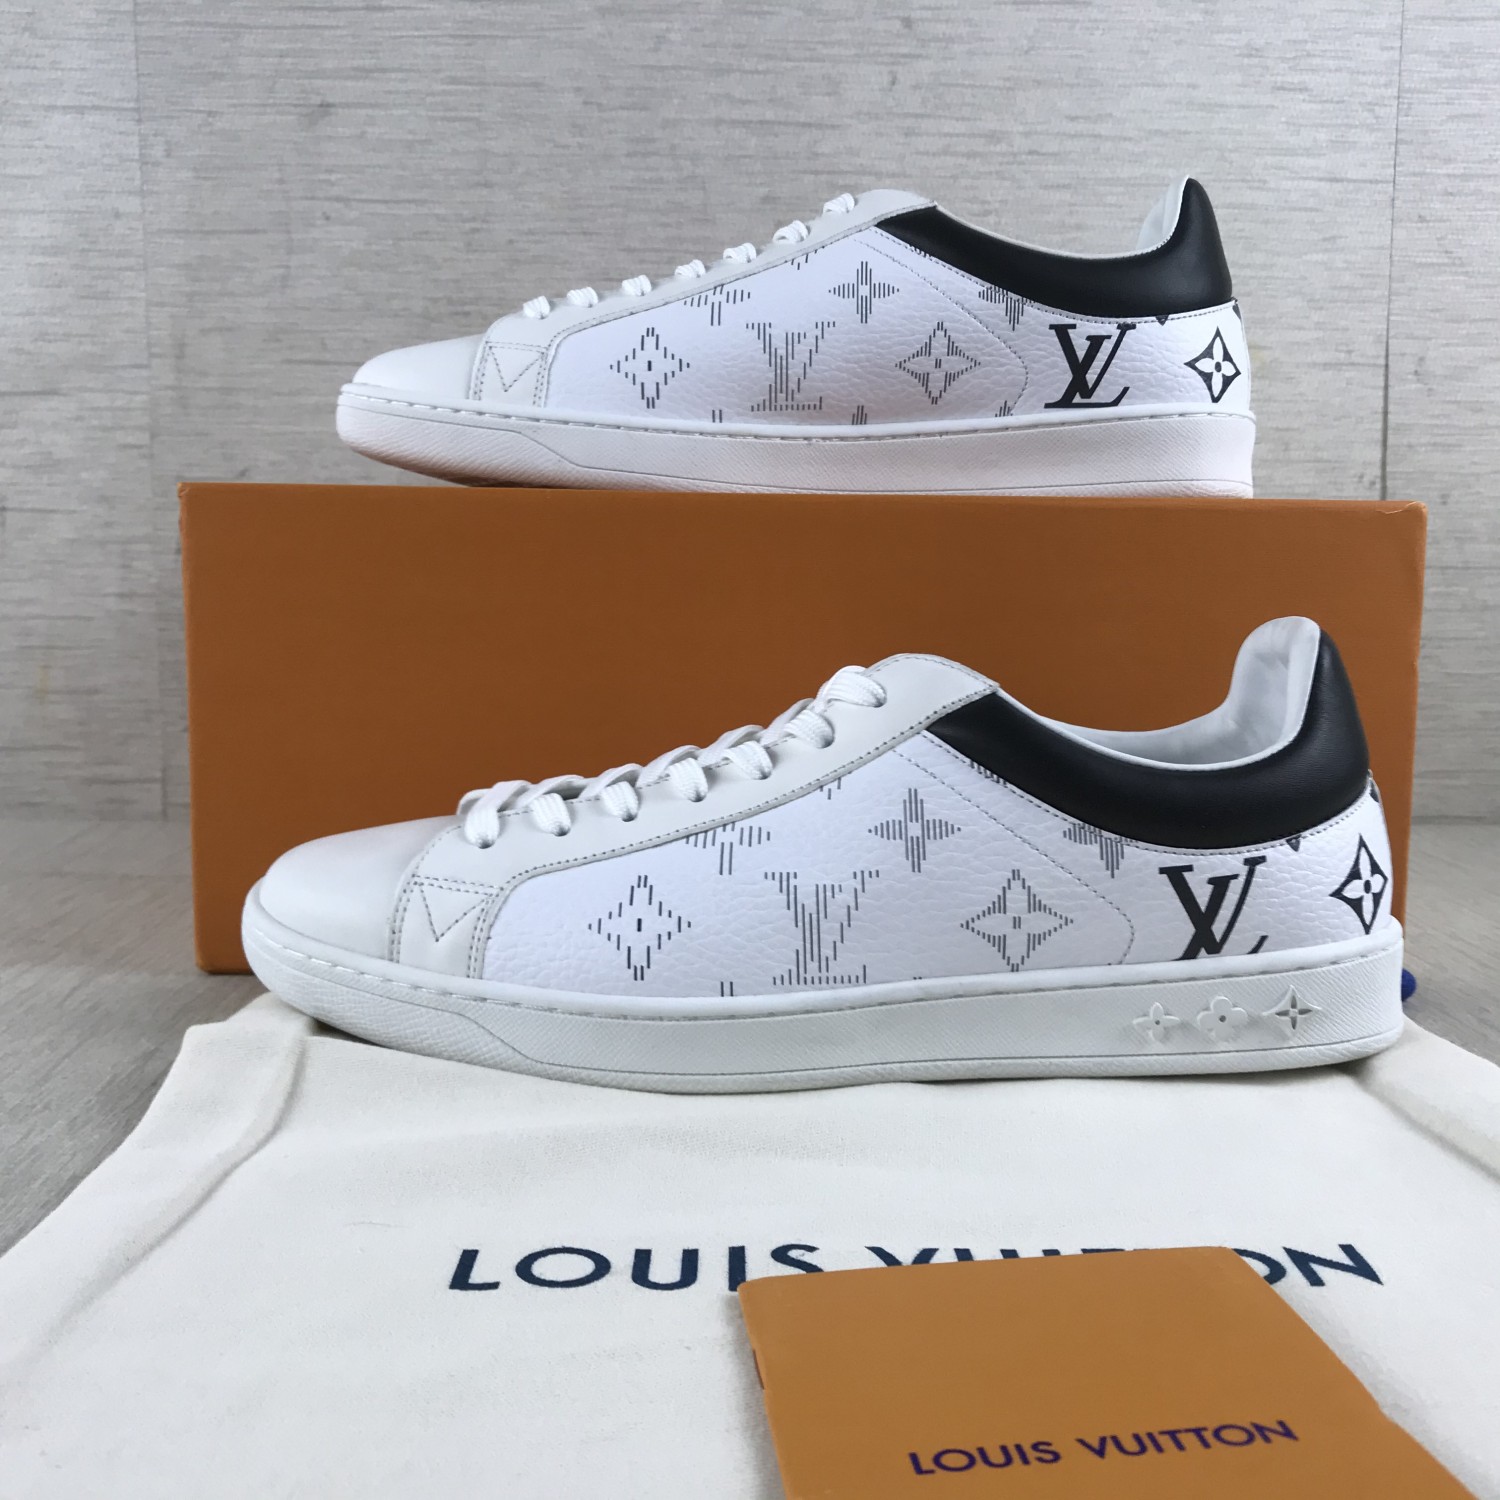 US$ 170 - LV Frontrow Sneaker - 0